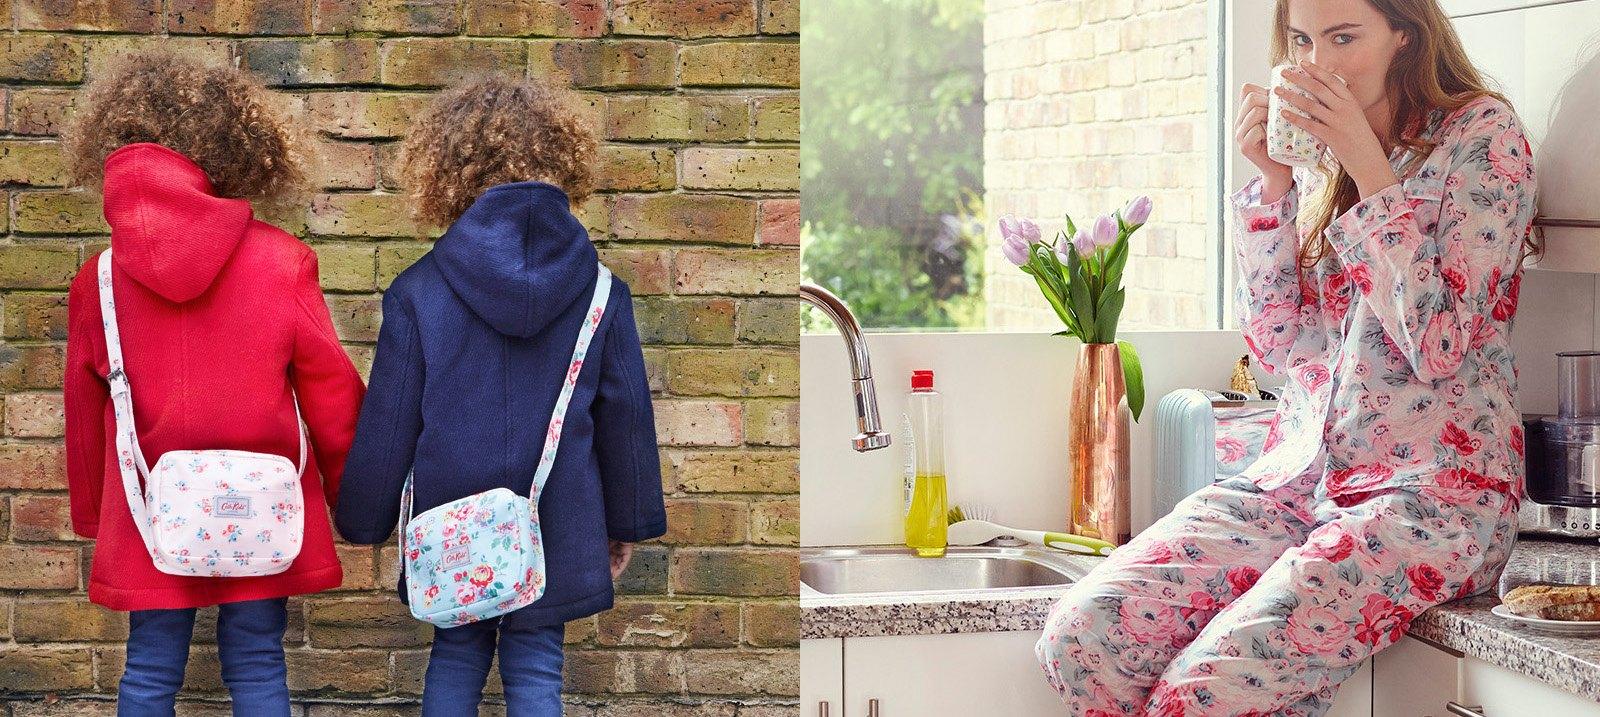 Cath Kidston for Home & Kids